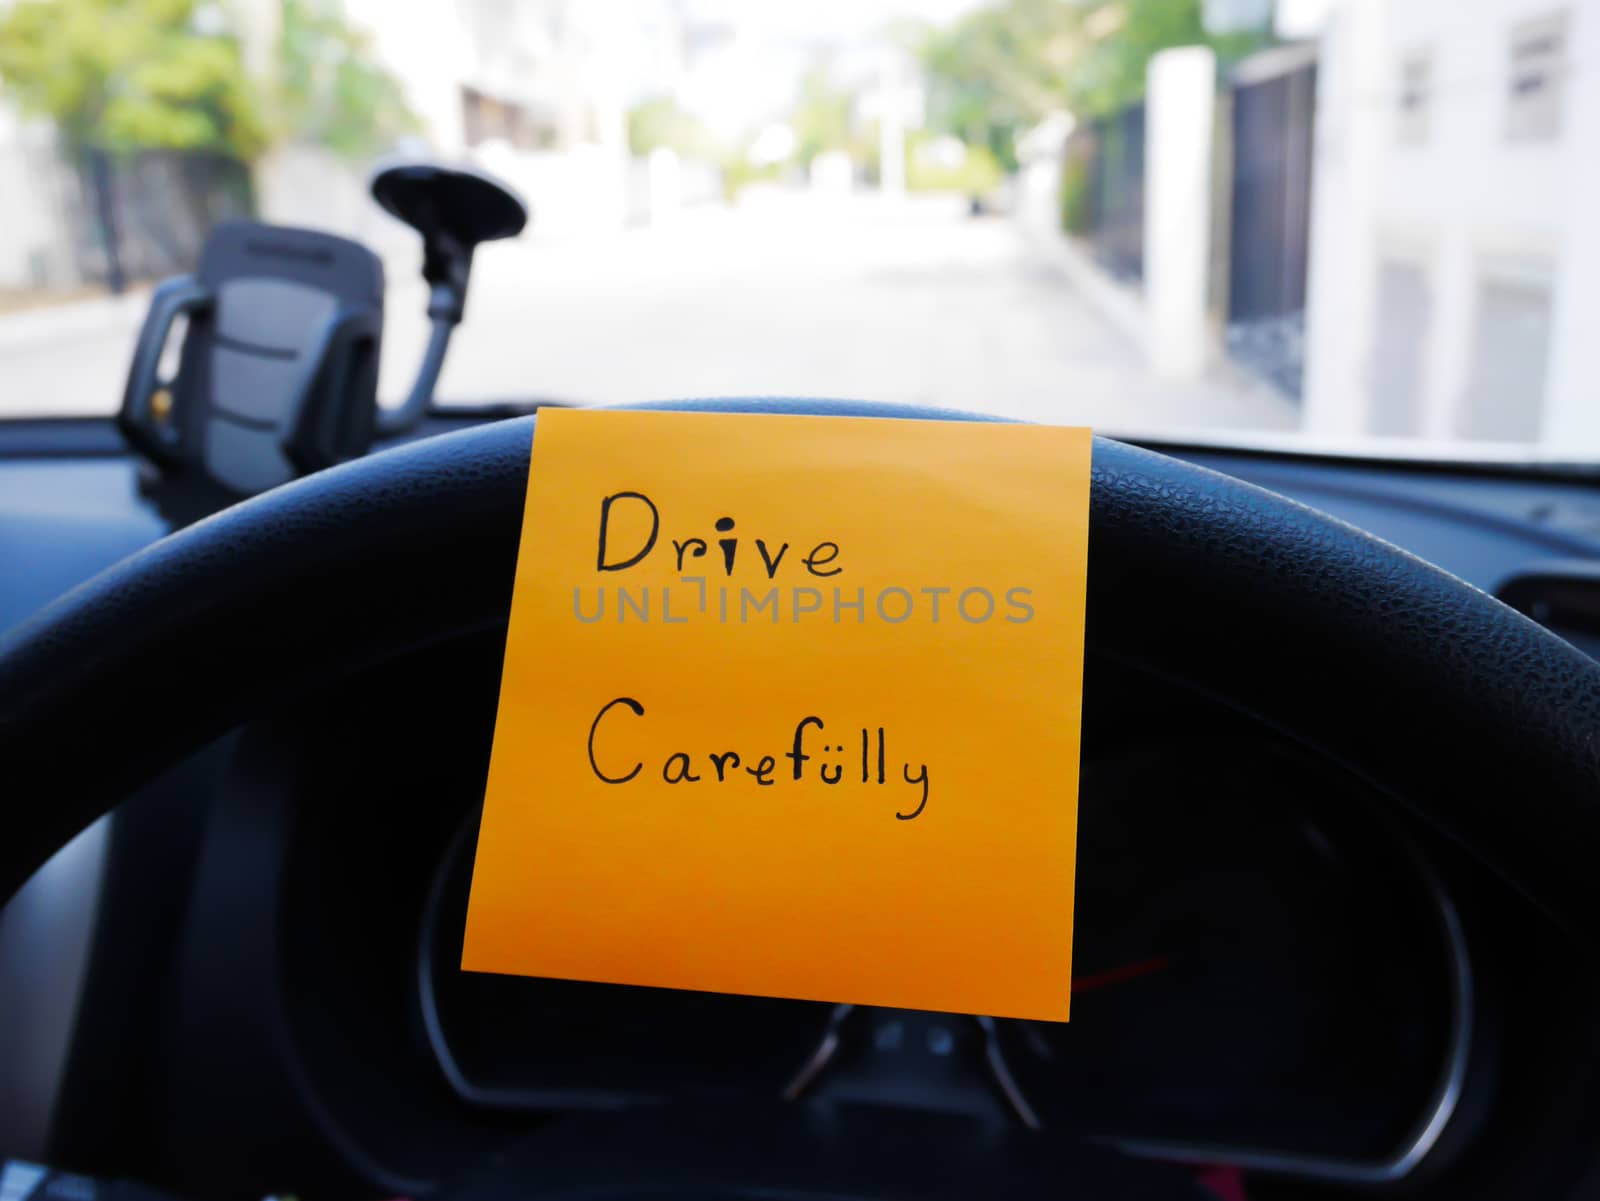 Drive carefully on post note attach in car for someone